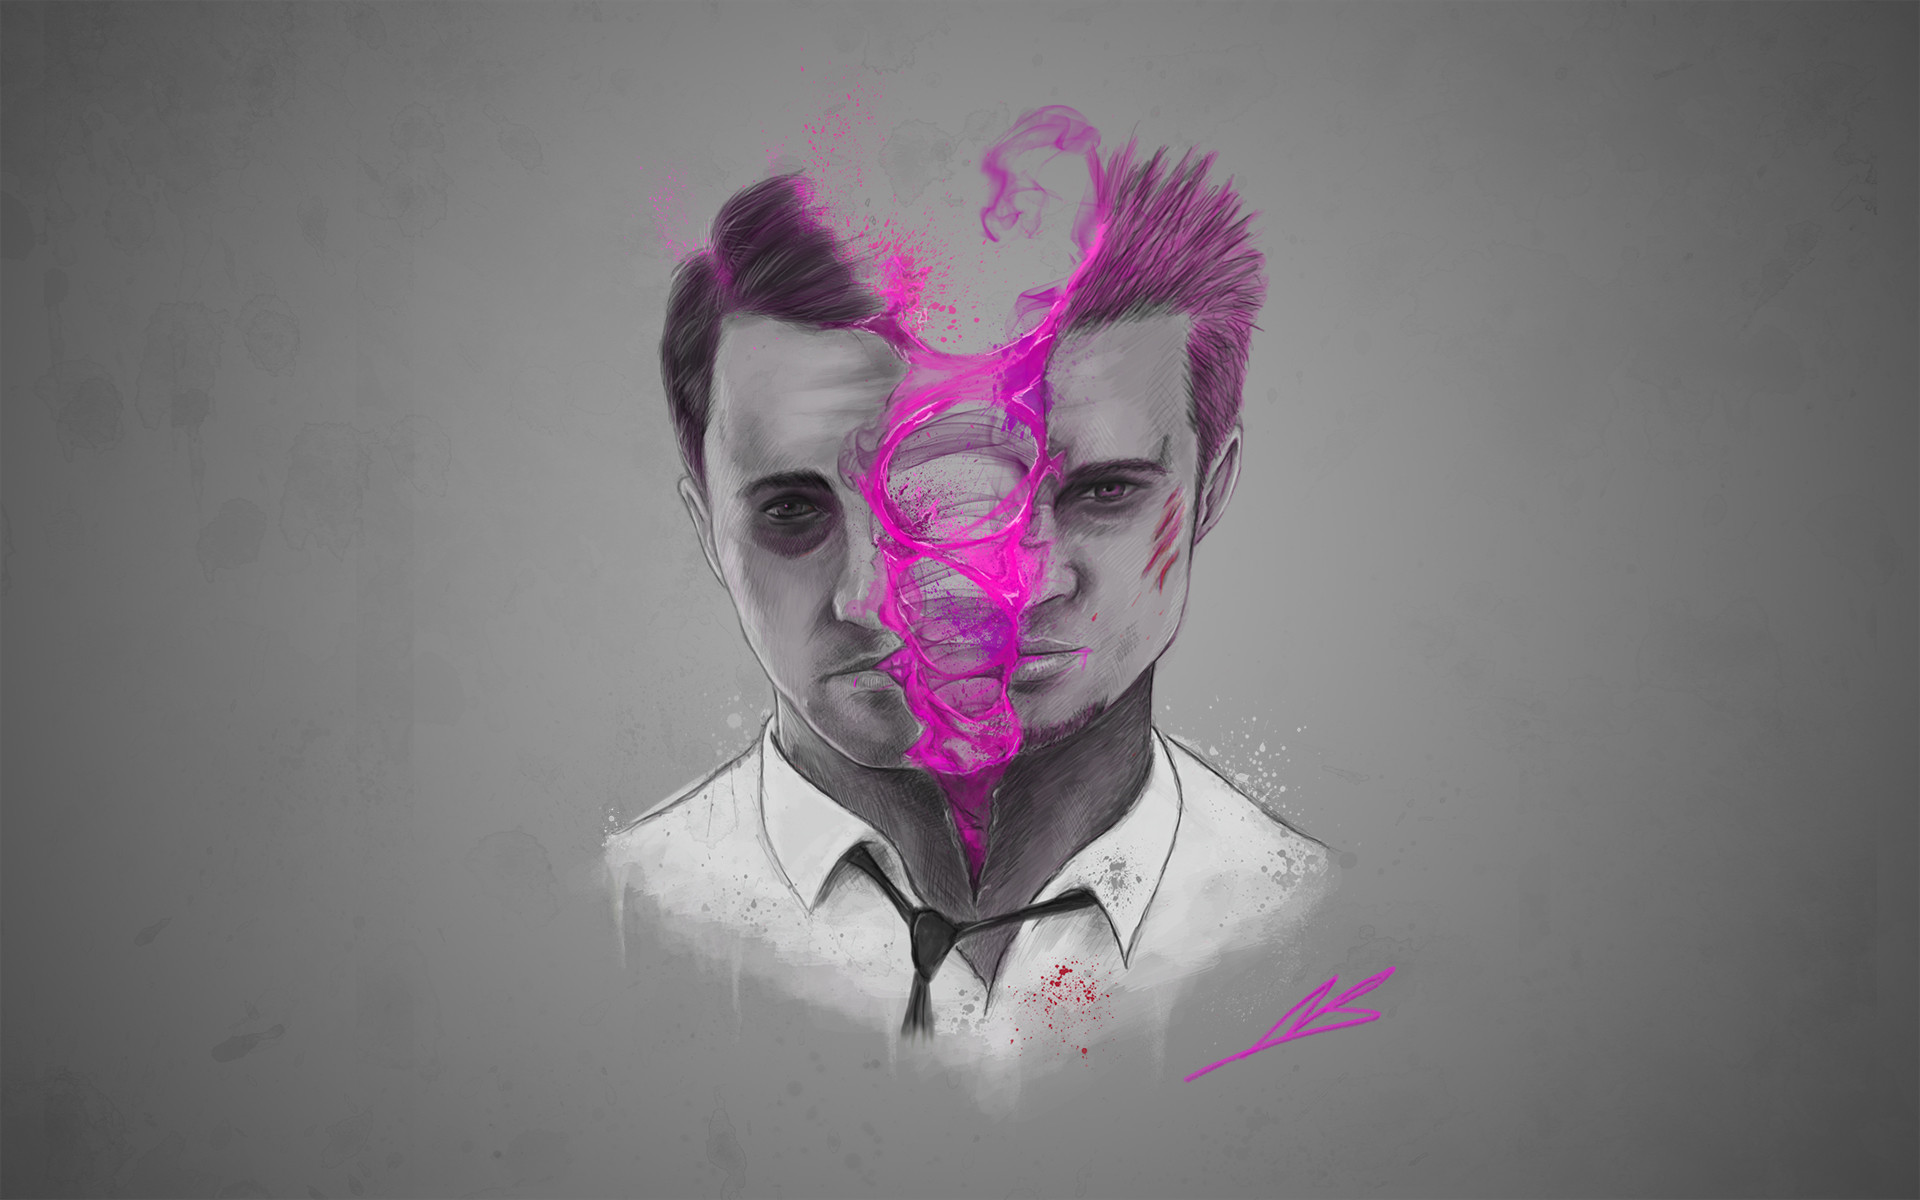 Fight Club Iphone Wallpaper - AUTO SEARCH IMAGE